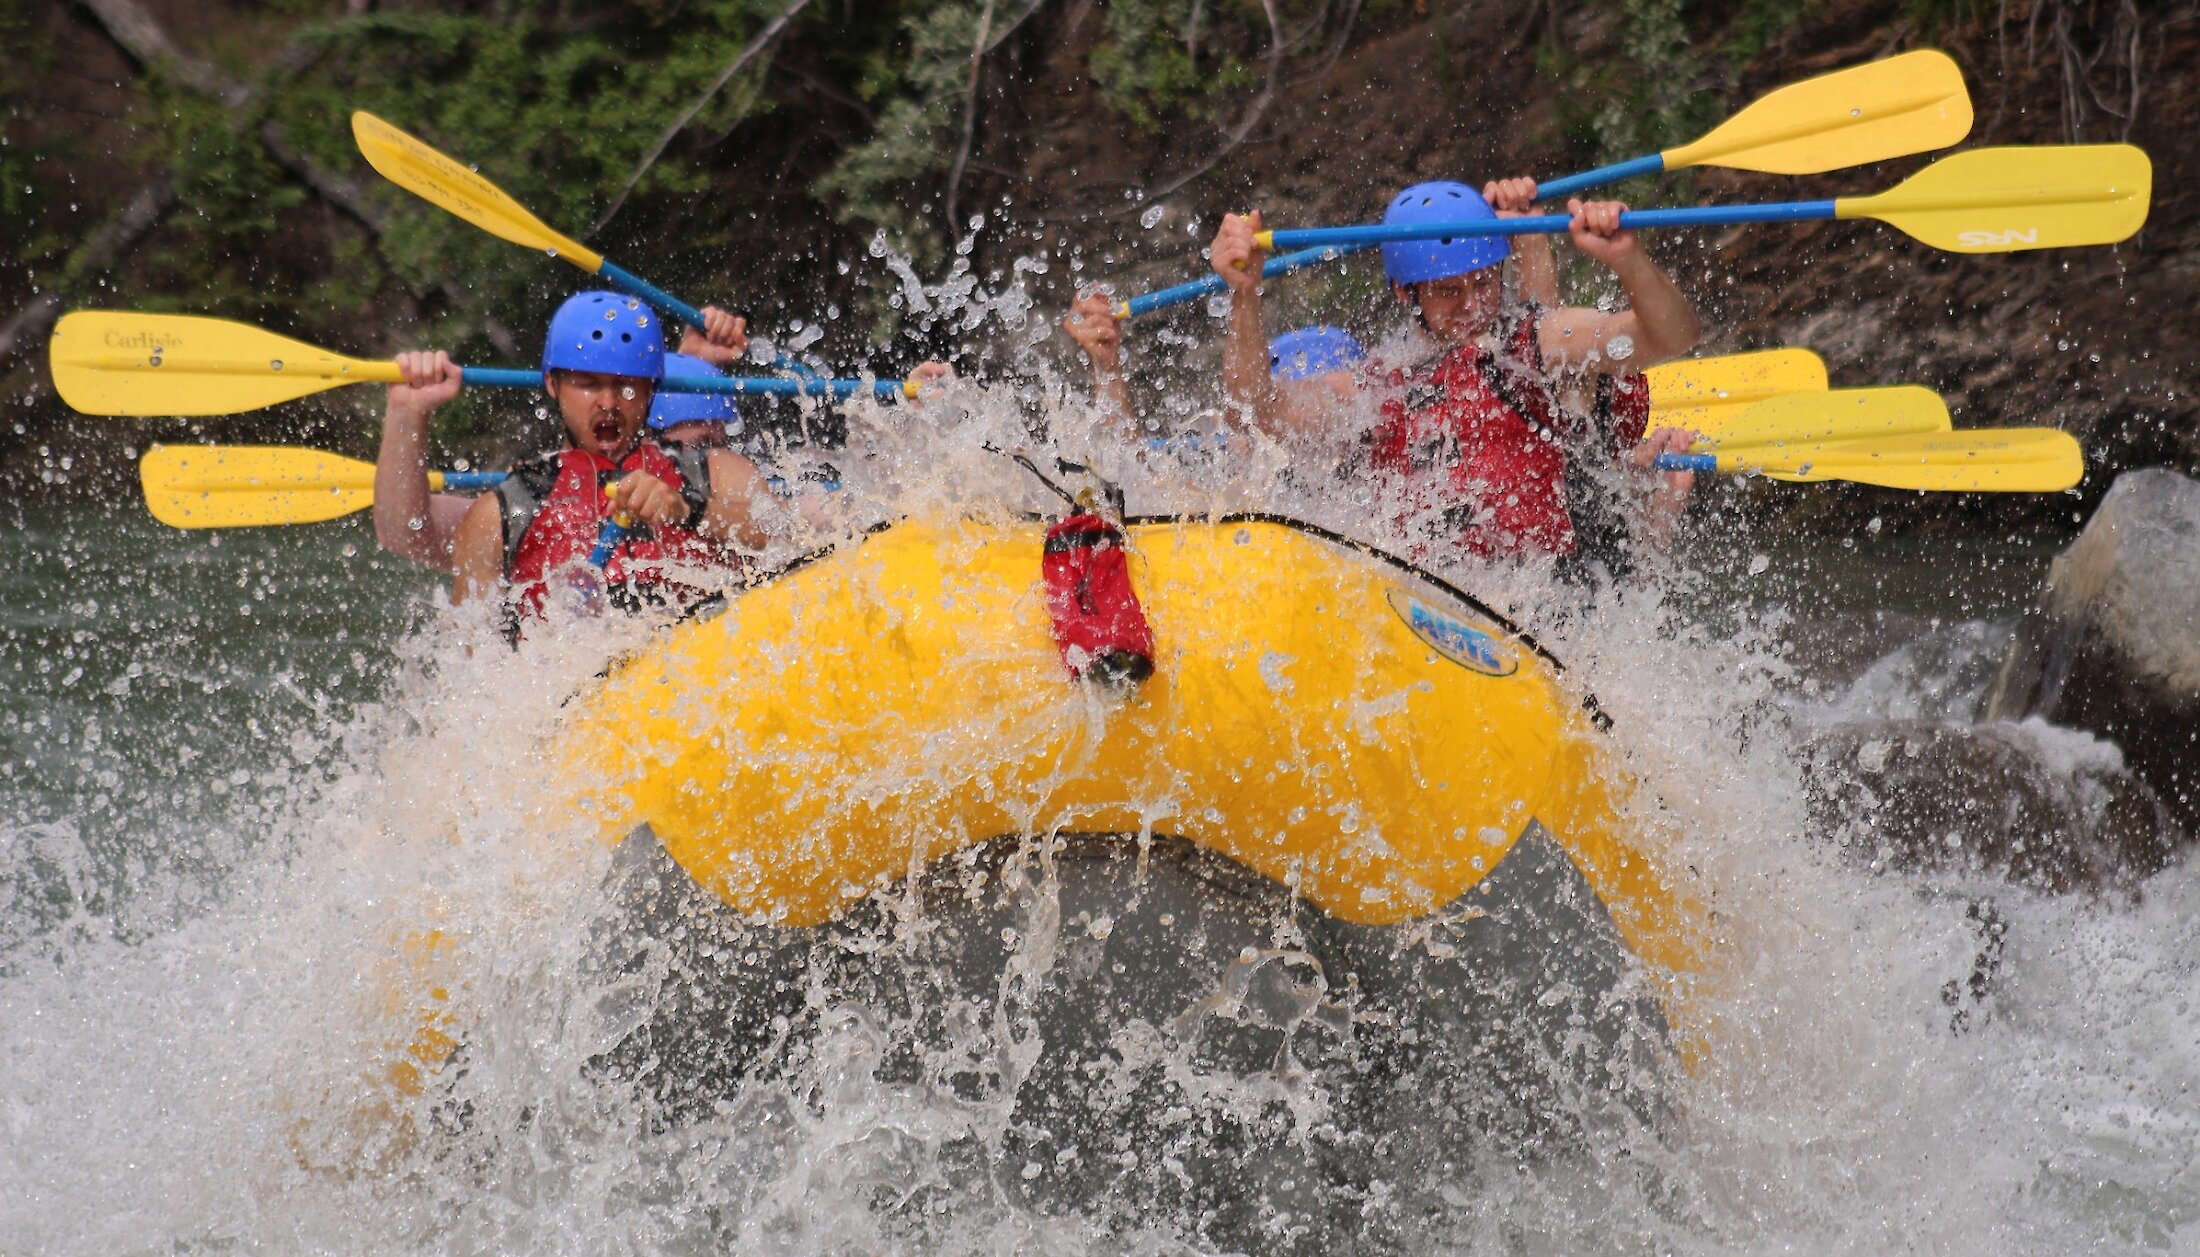 People in a raft bracing for a big wave on Kananaskis river